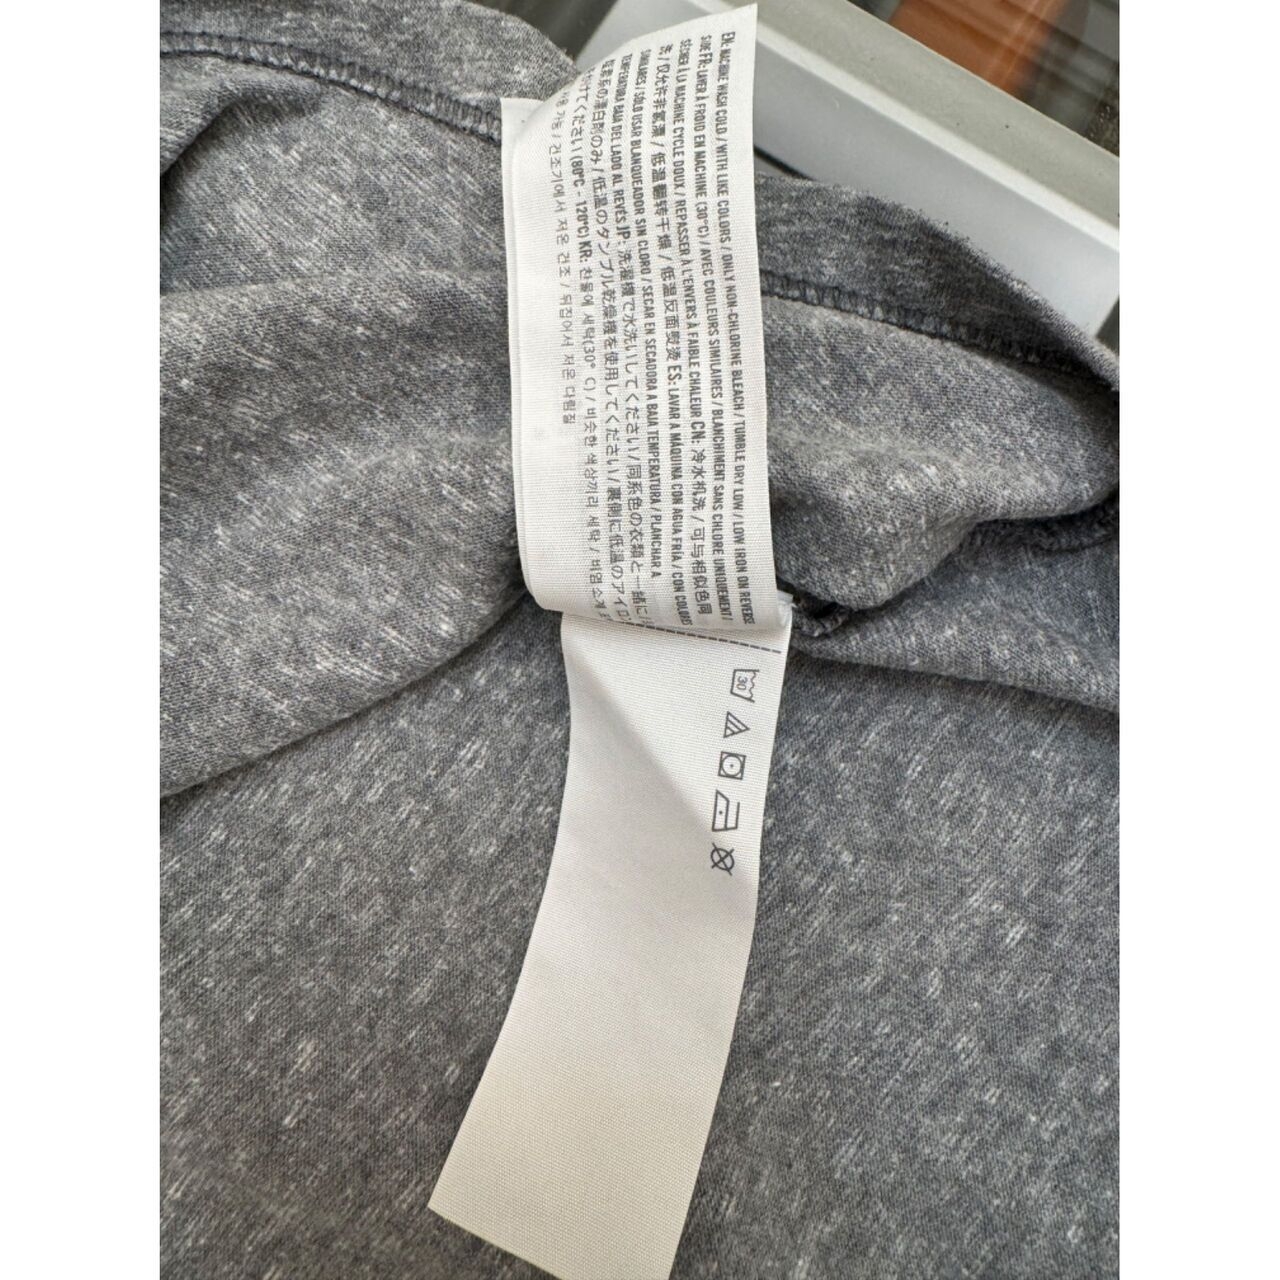 Abercrombie & Fitch Grey T-Shirt